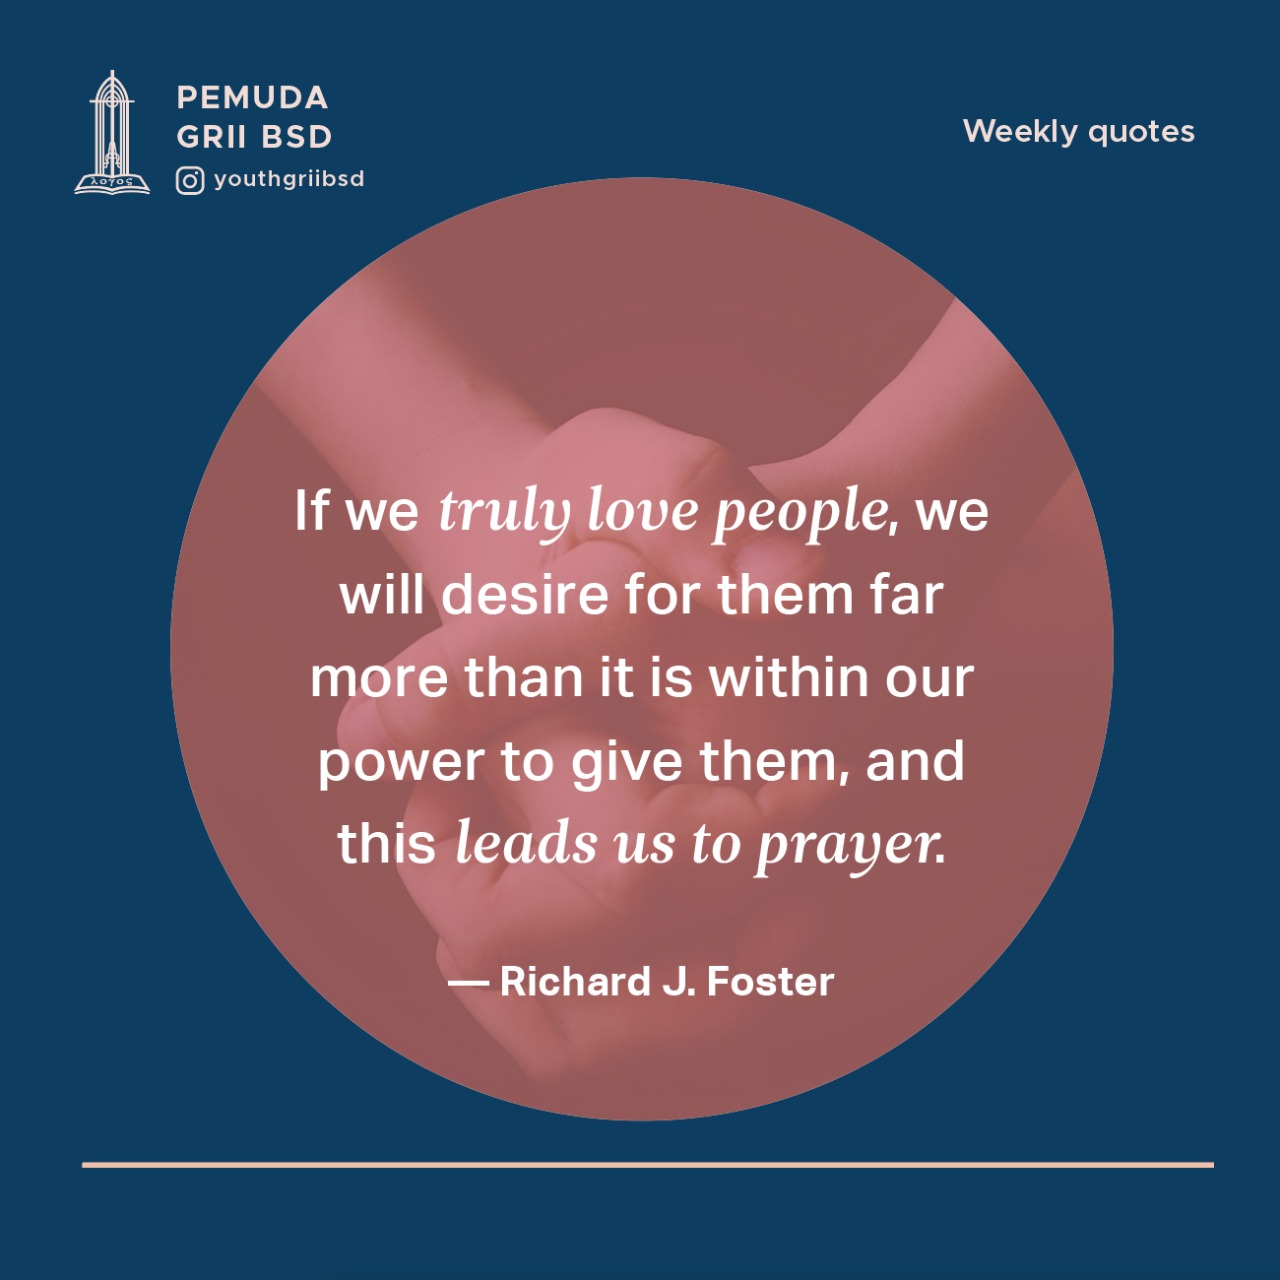 If we truly love people, we will desire for them far more than it is within our power to give them, and this leads us to prayer.